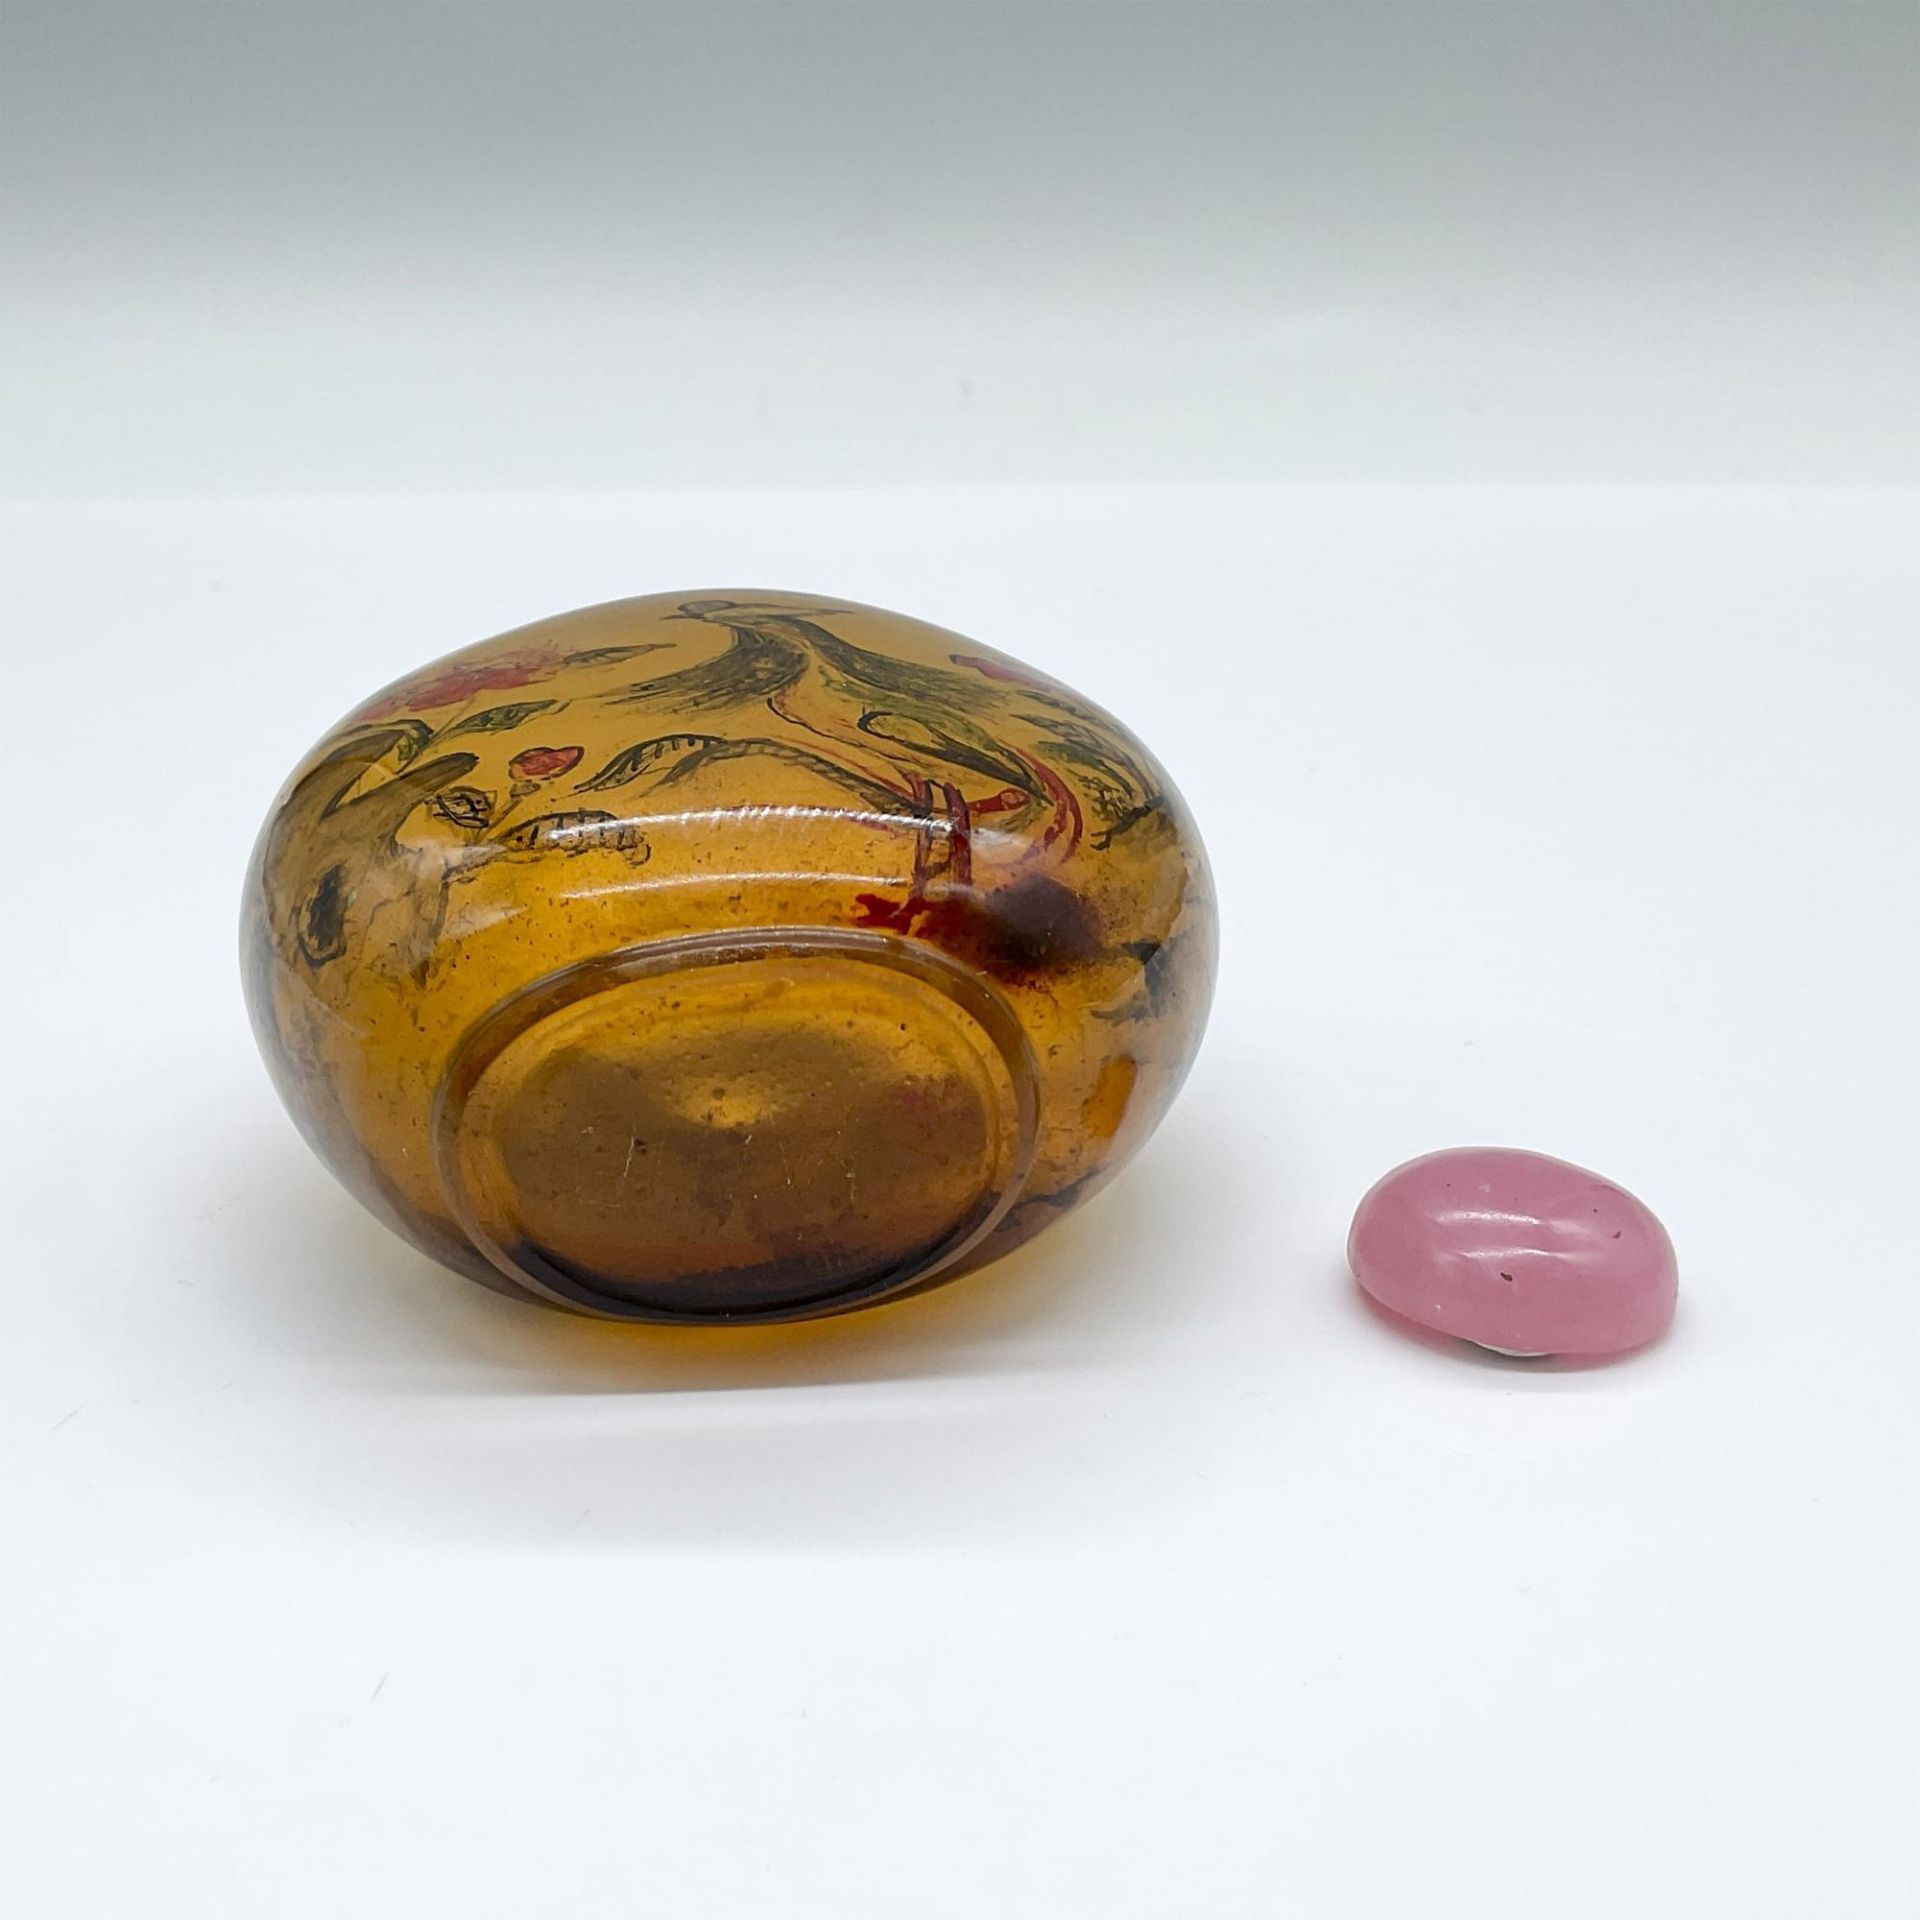 Vintage Chinese Reverse Painted Snuff Bottle - Image 3 of 3